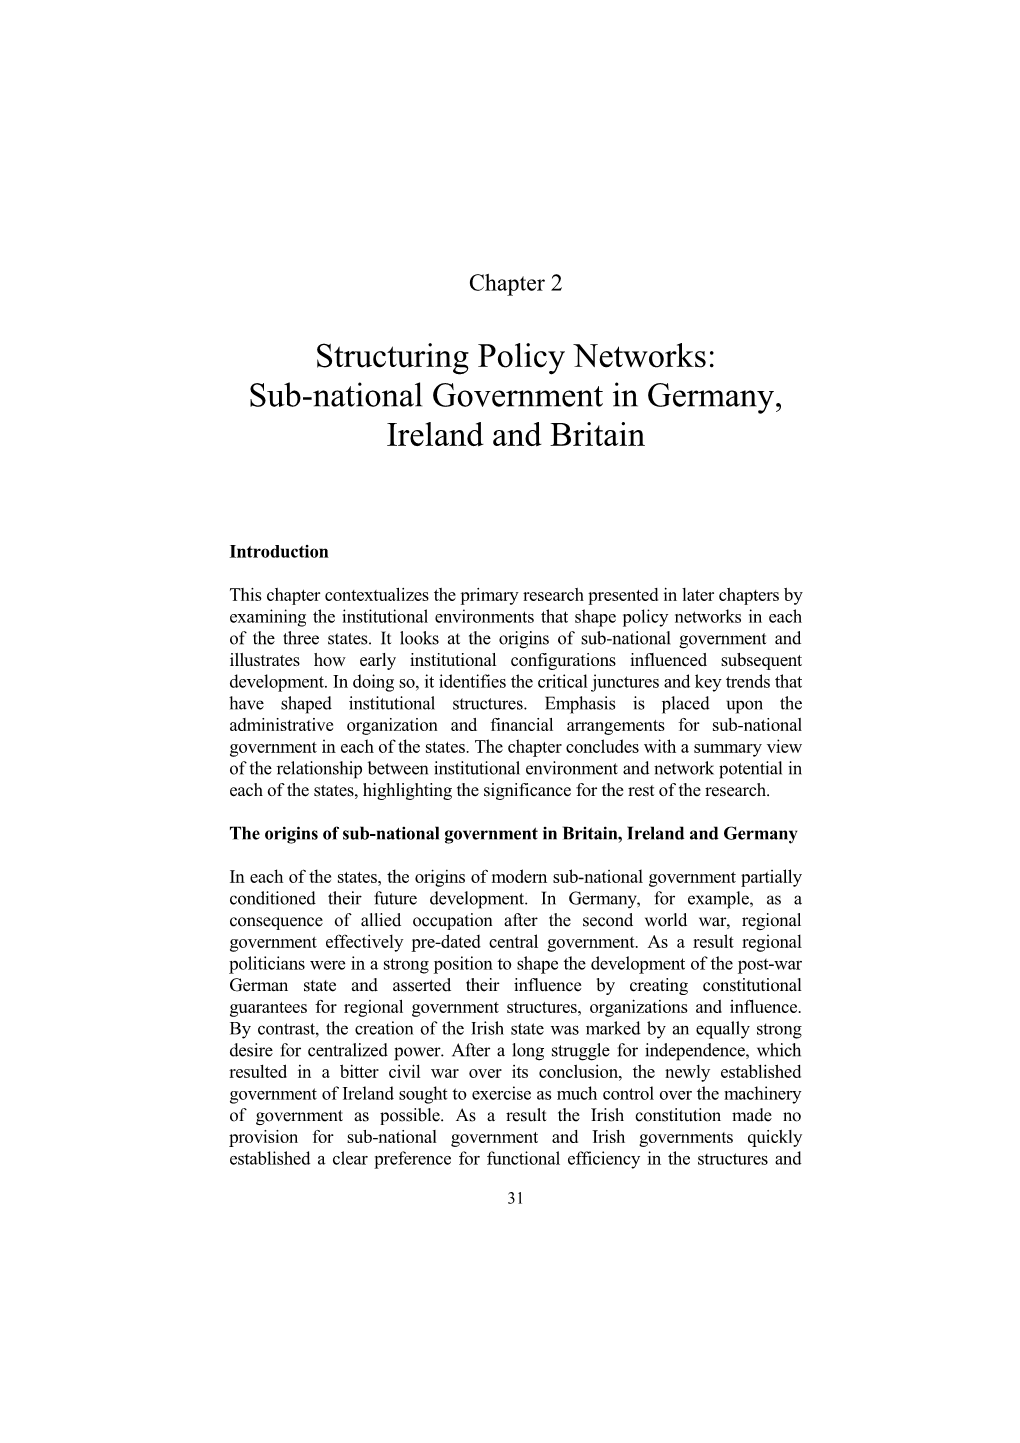 Sub-National Government in Germany, Ireland and Britain